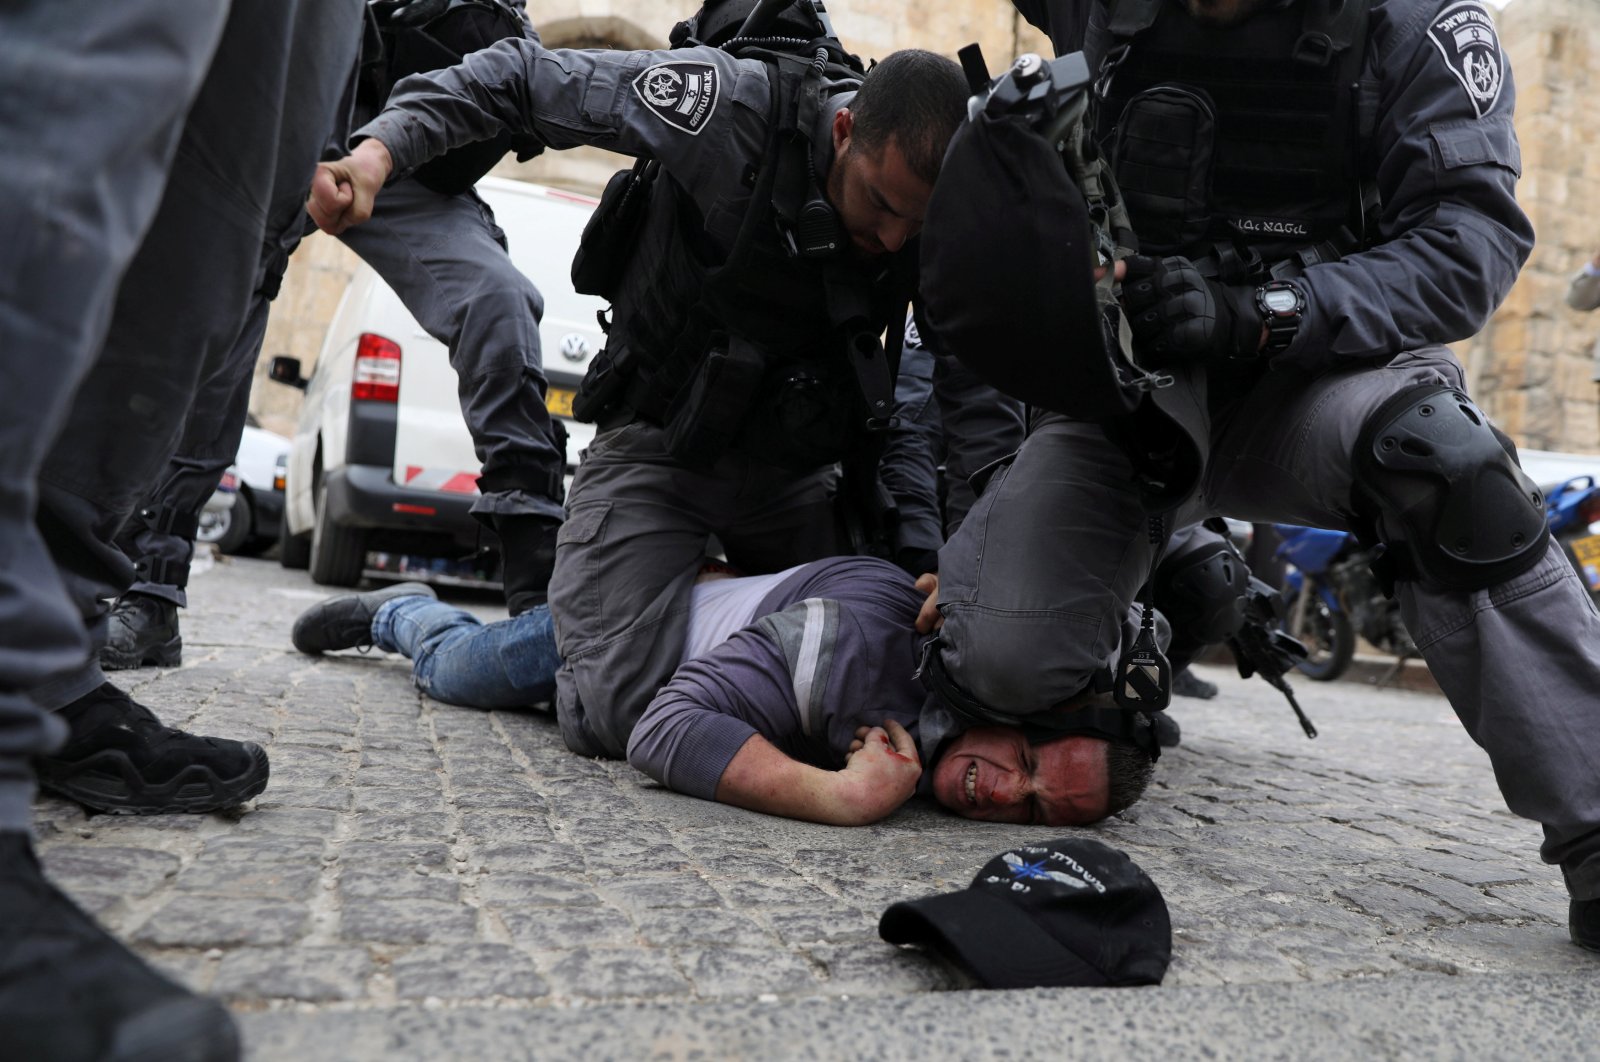 Israeli police officers detain a Palestinian protestor during scuffles outside the compound housing al-Aqsa Mosque in Jerusalem's Old City, March 12, 2019. (Reuters Photo)